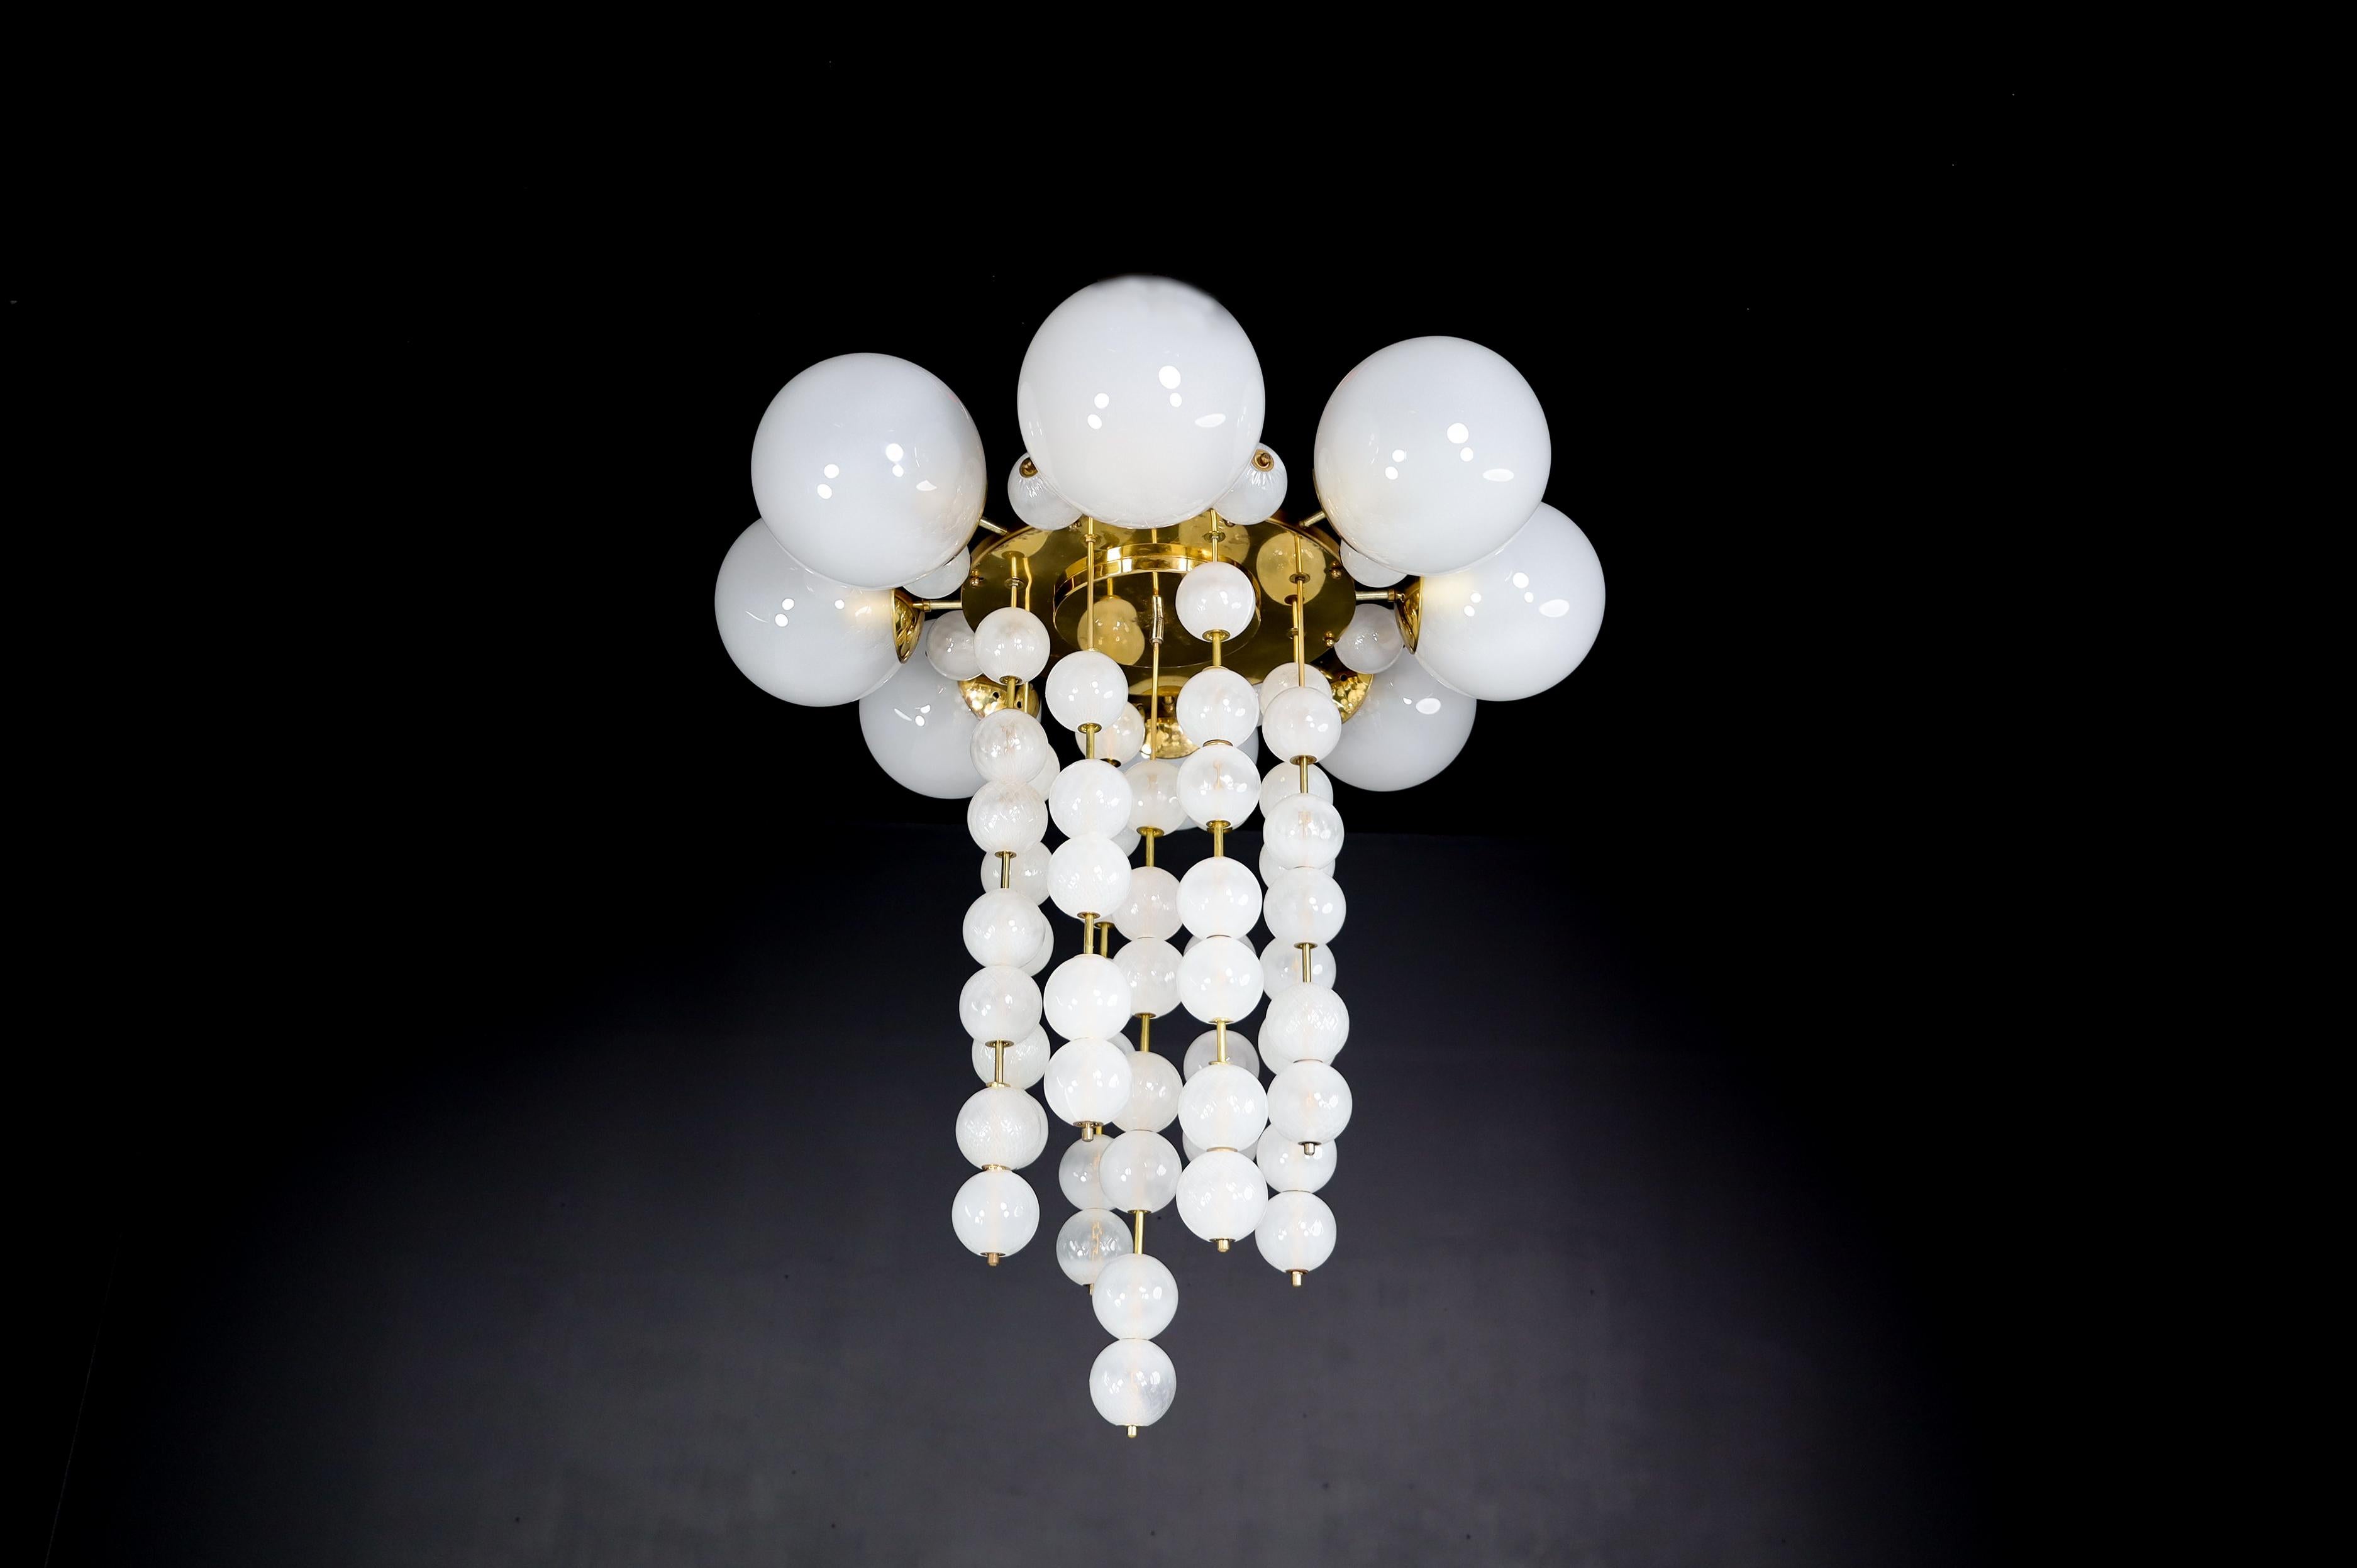 Grand Chandelier with Brass Fixture and Hand-blowed Frosted Glass Globes, 1960s For Sale 3